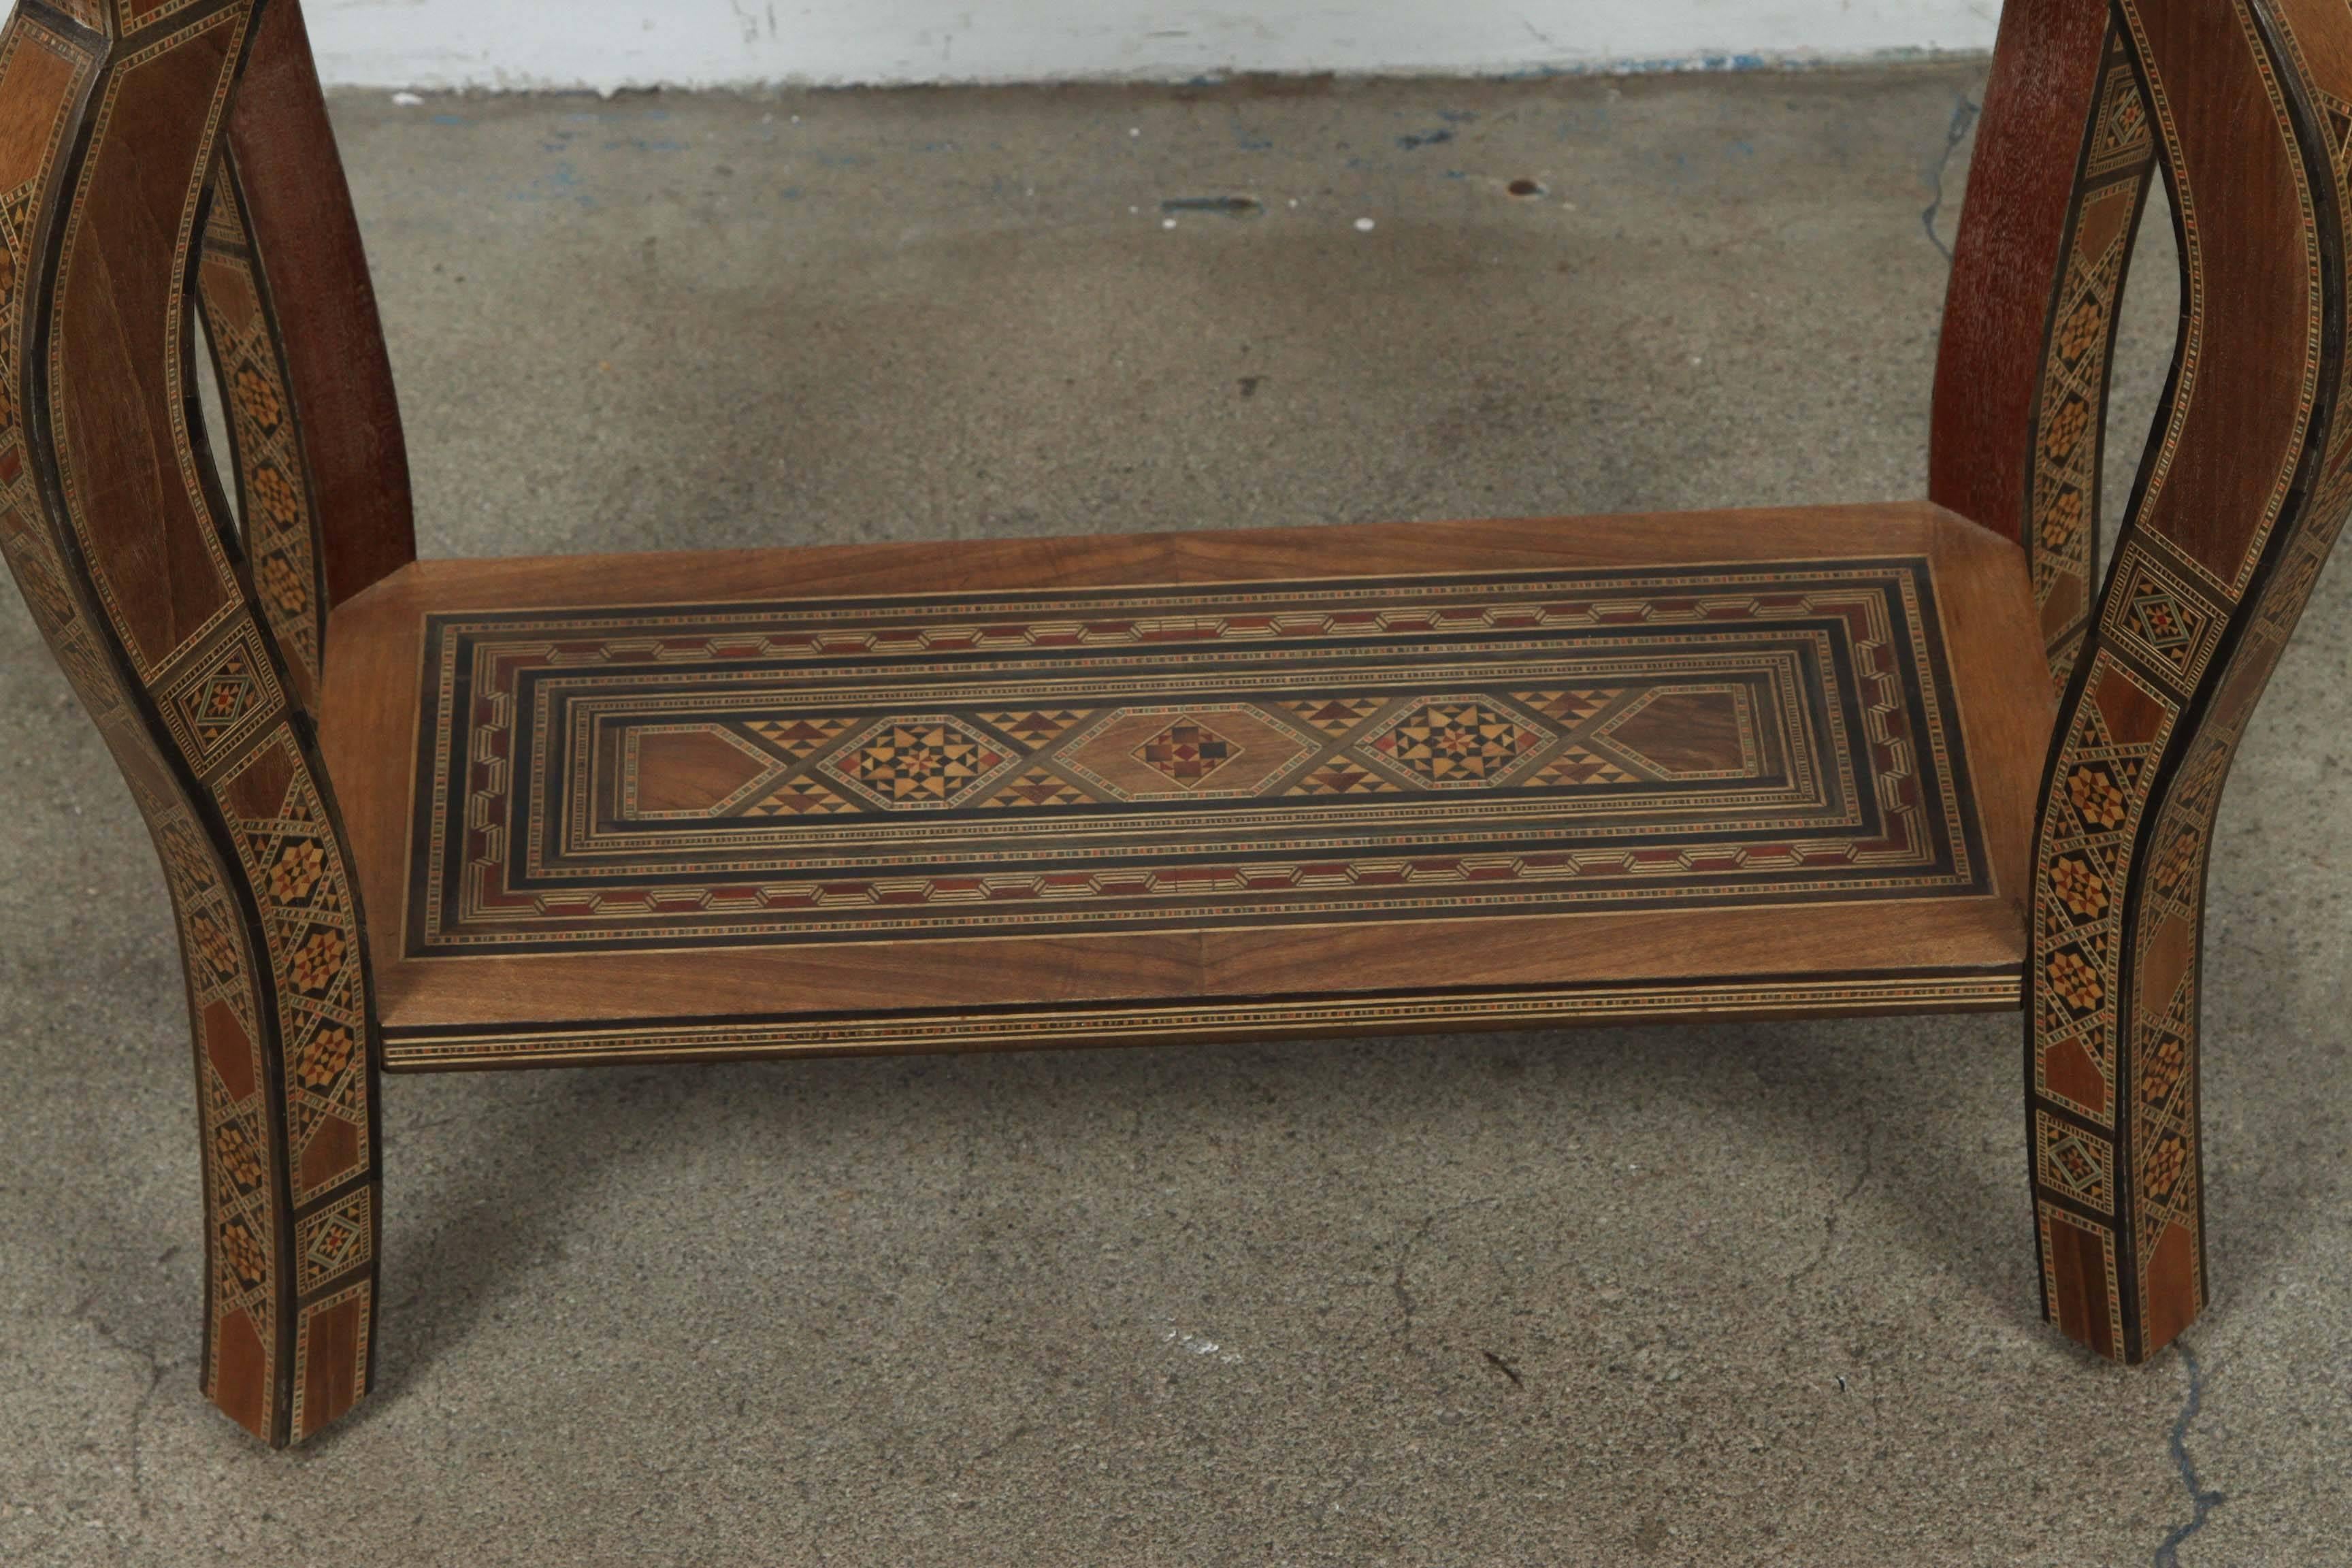 Syrian game table, inlaid, multi games tables, velvet box to hold the game pieces.
Nice marquetry inlay, elegant Moorish look.
Some marquetry missing on the side, see pictures.
Measures: 25 x 12.5 x 28